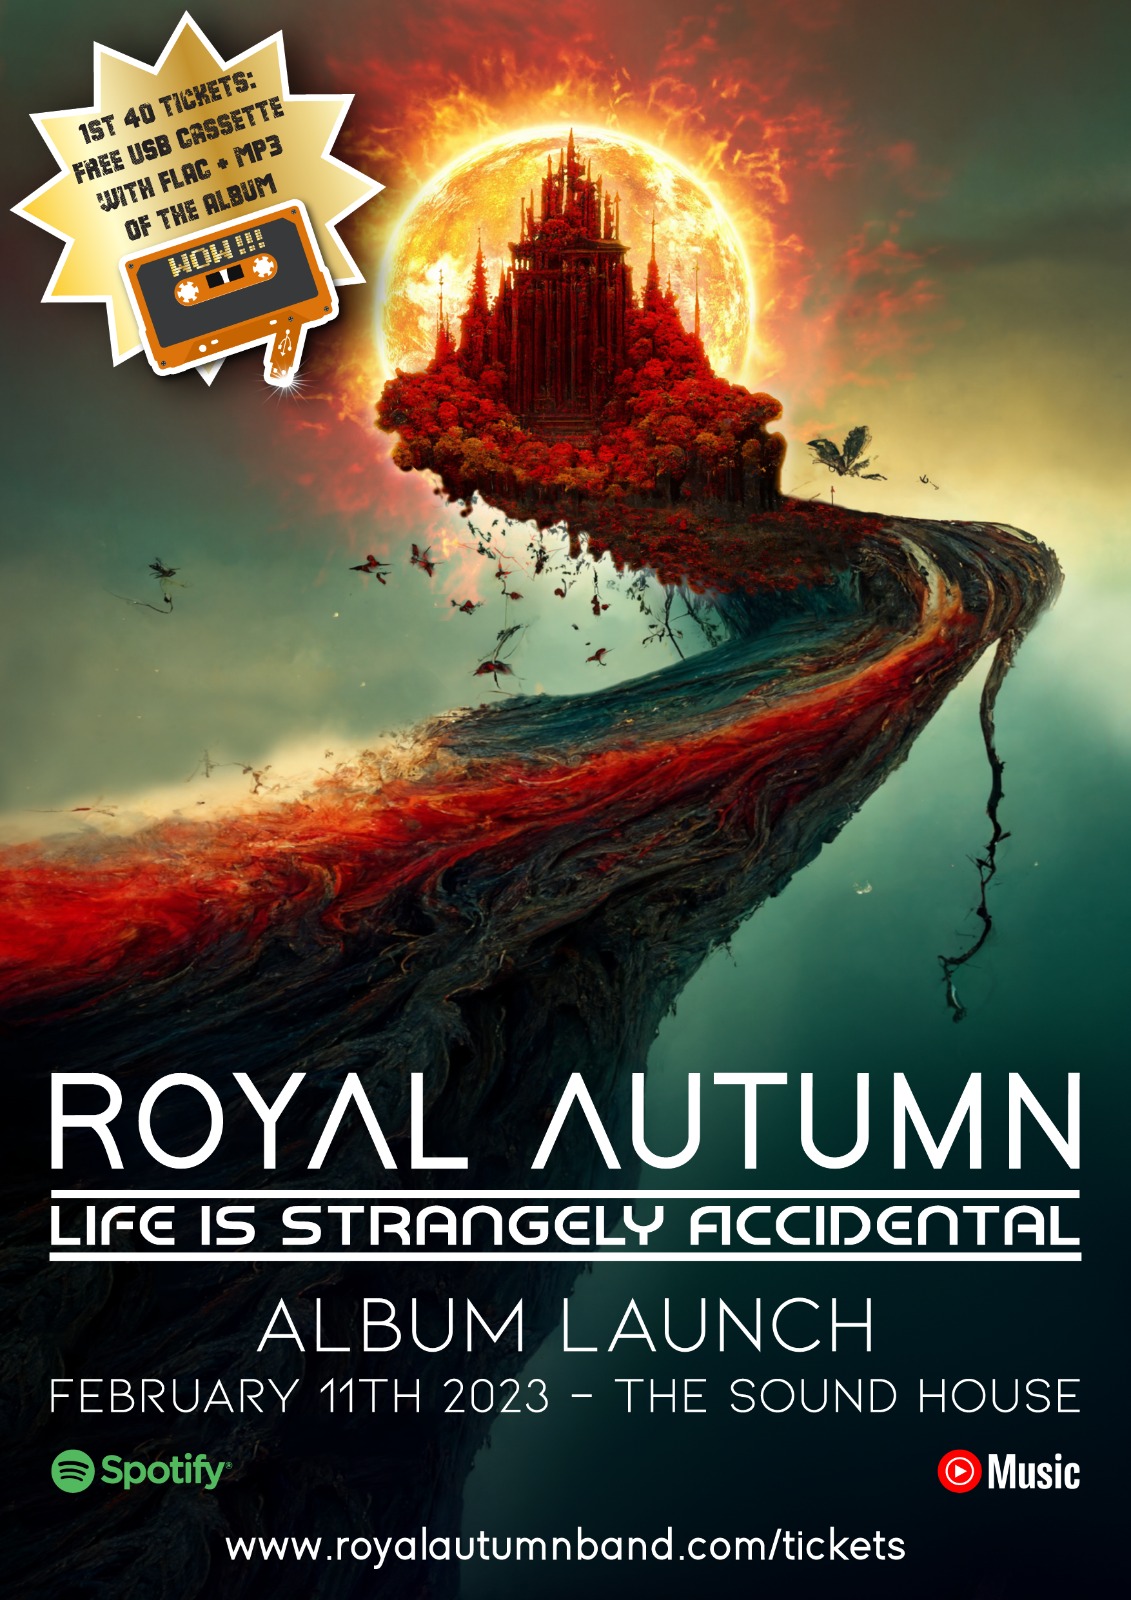 Royal Autumn 'Life is Strangely Accidental' Album Launch